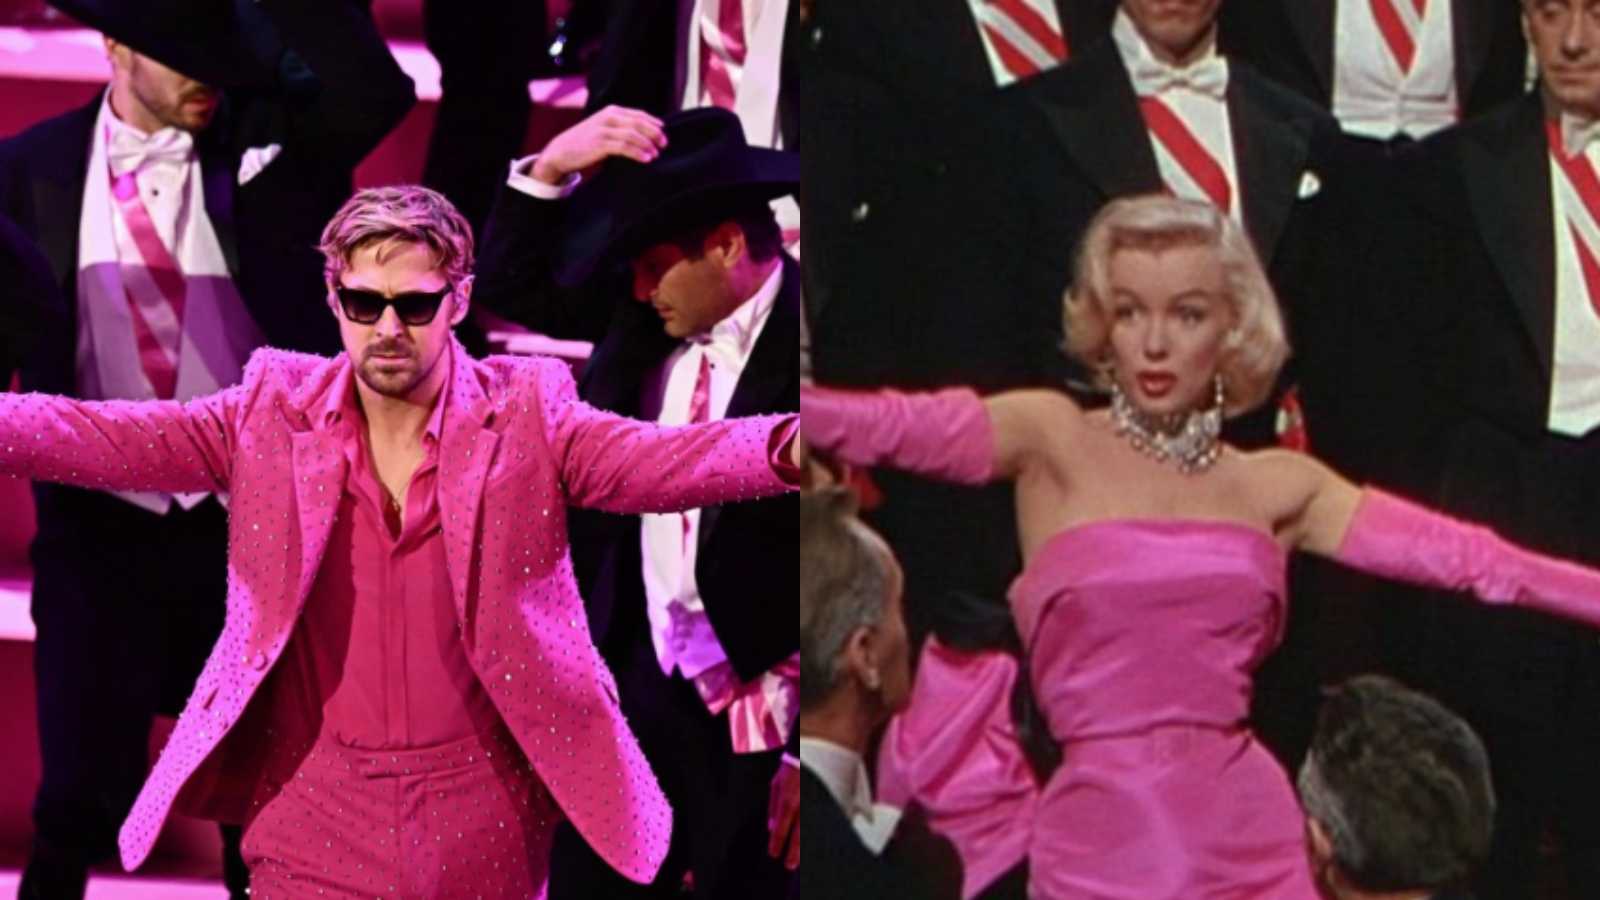 Ryan Gosling's hot pink suit during the Oscars performance was a tribute to Marilyn Monroe? Here's what we know